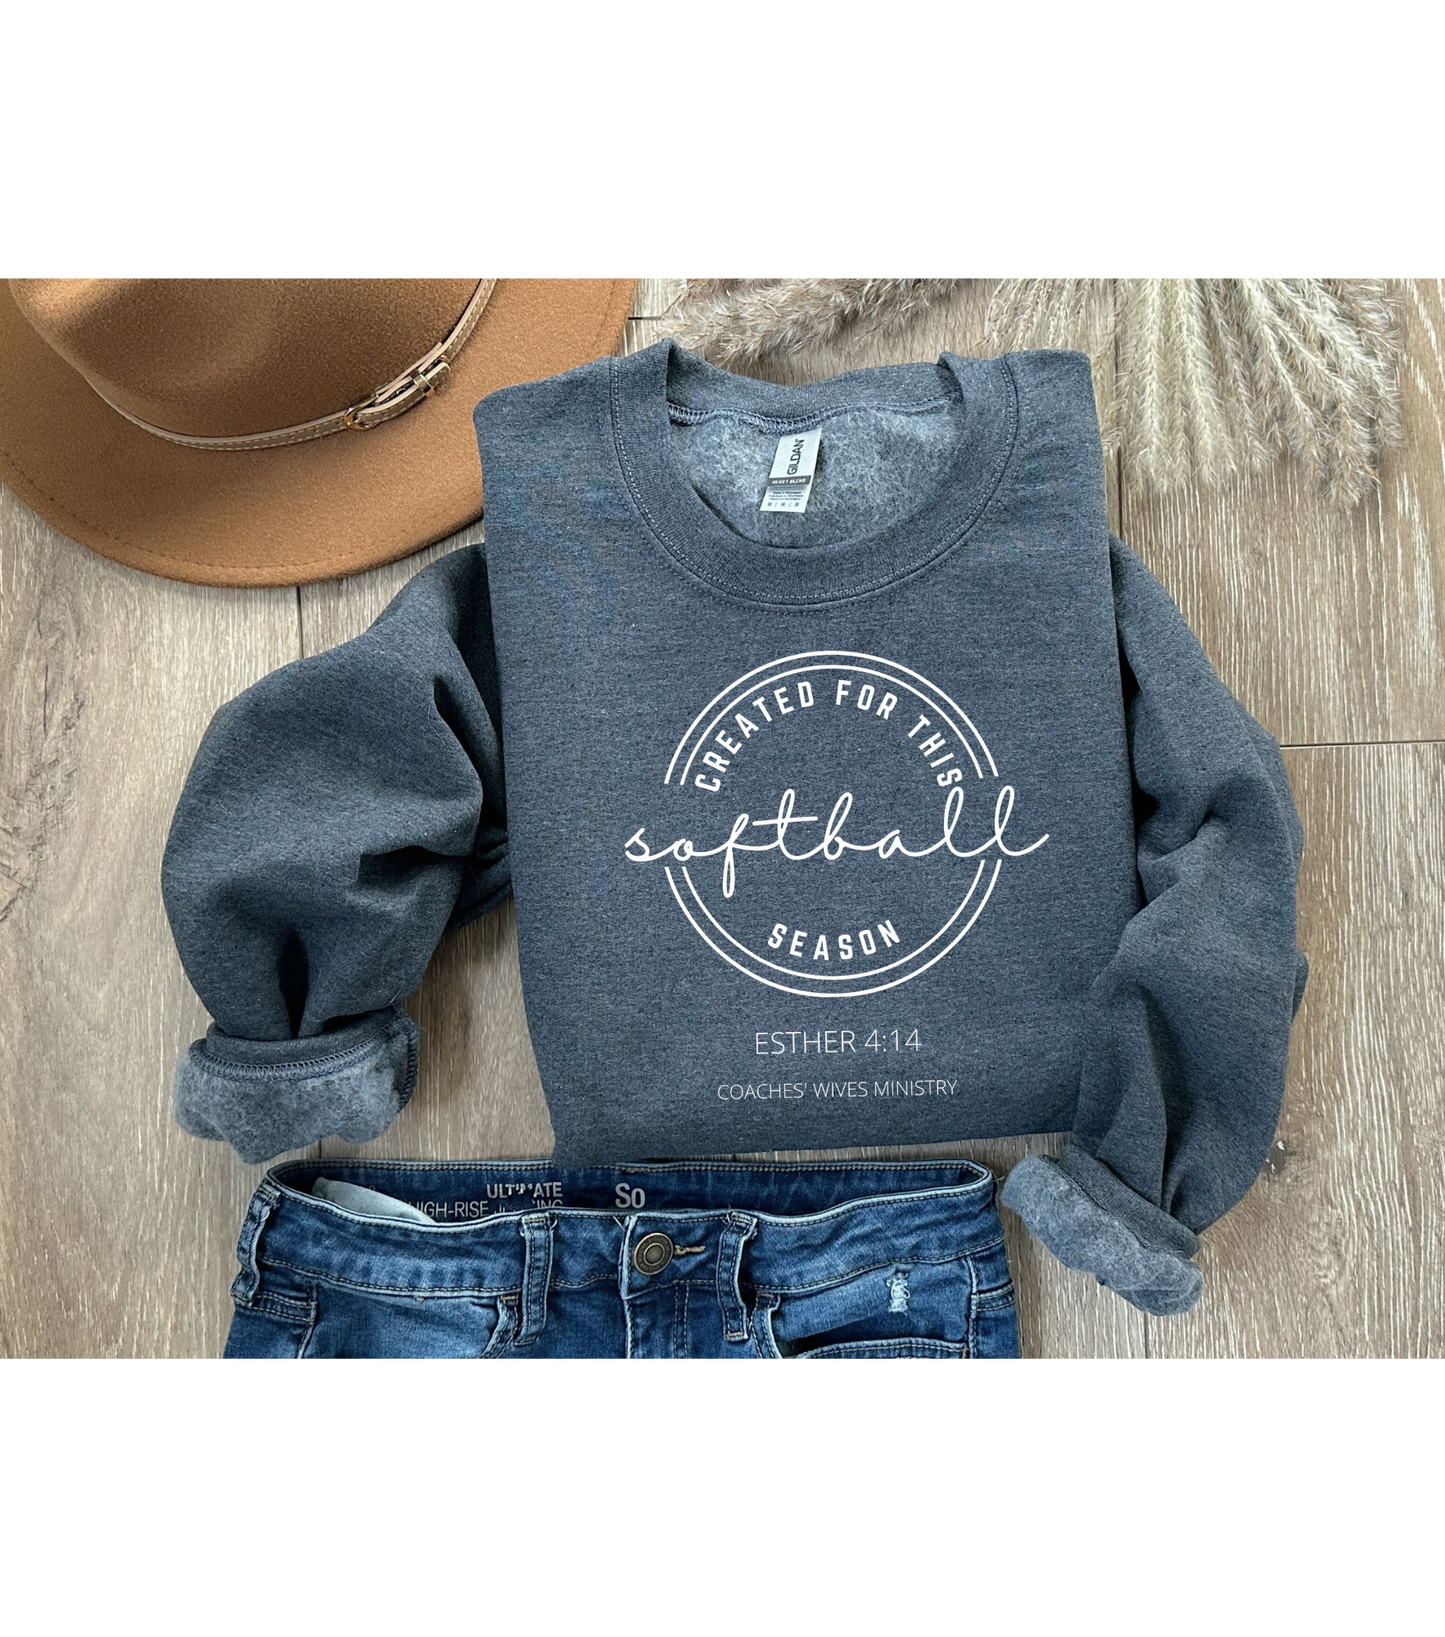 Created For This Season Cozy Sweatshirt For The Softball Coach Wife